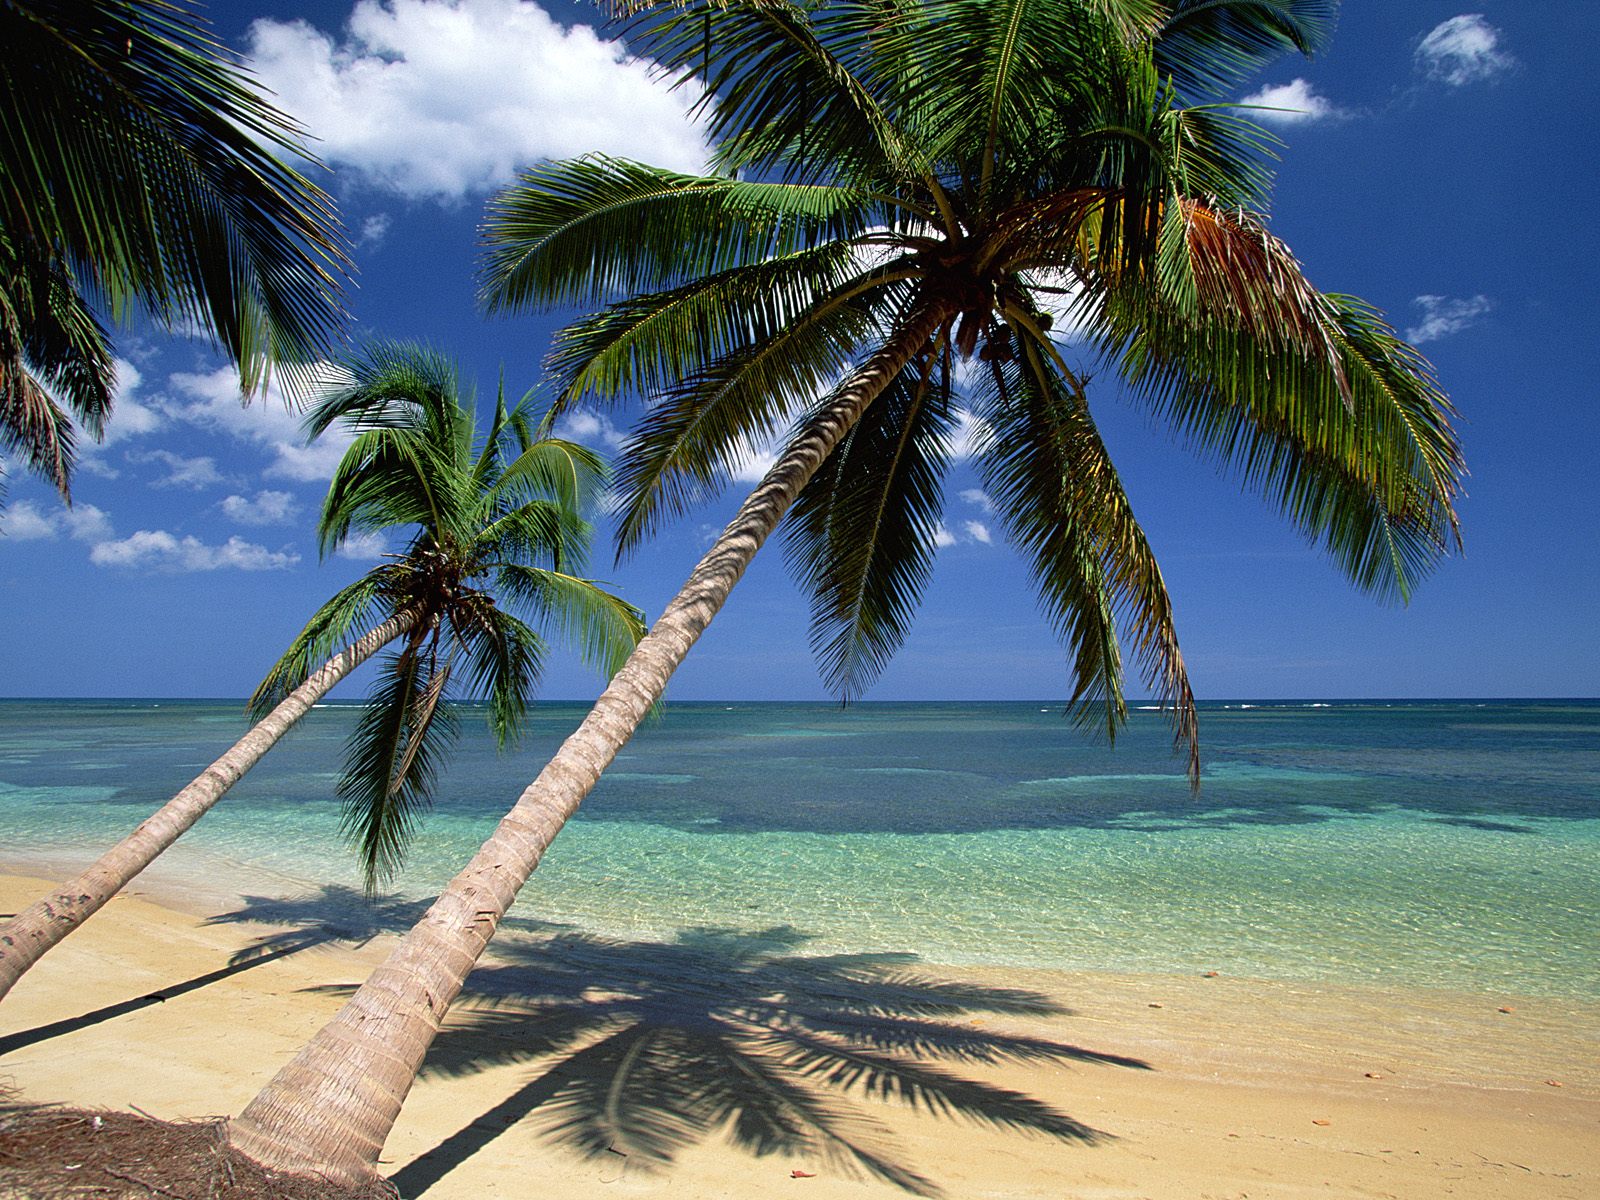 Coconut Palm Tree, Pictures & Facts on Coconut Palm Trees